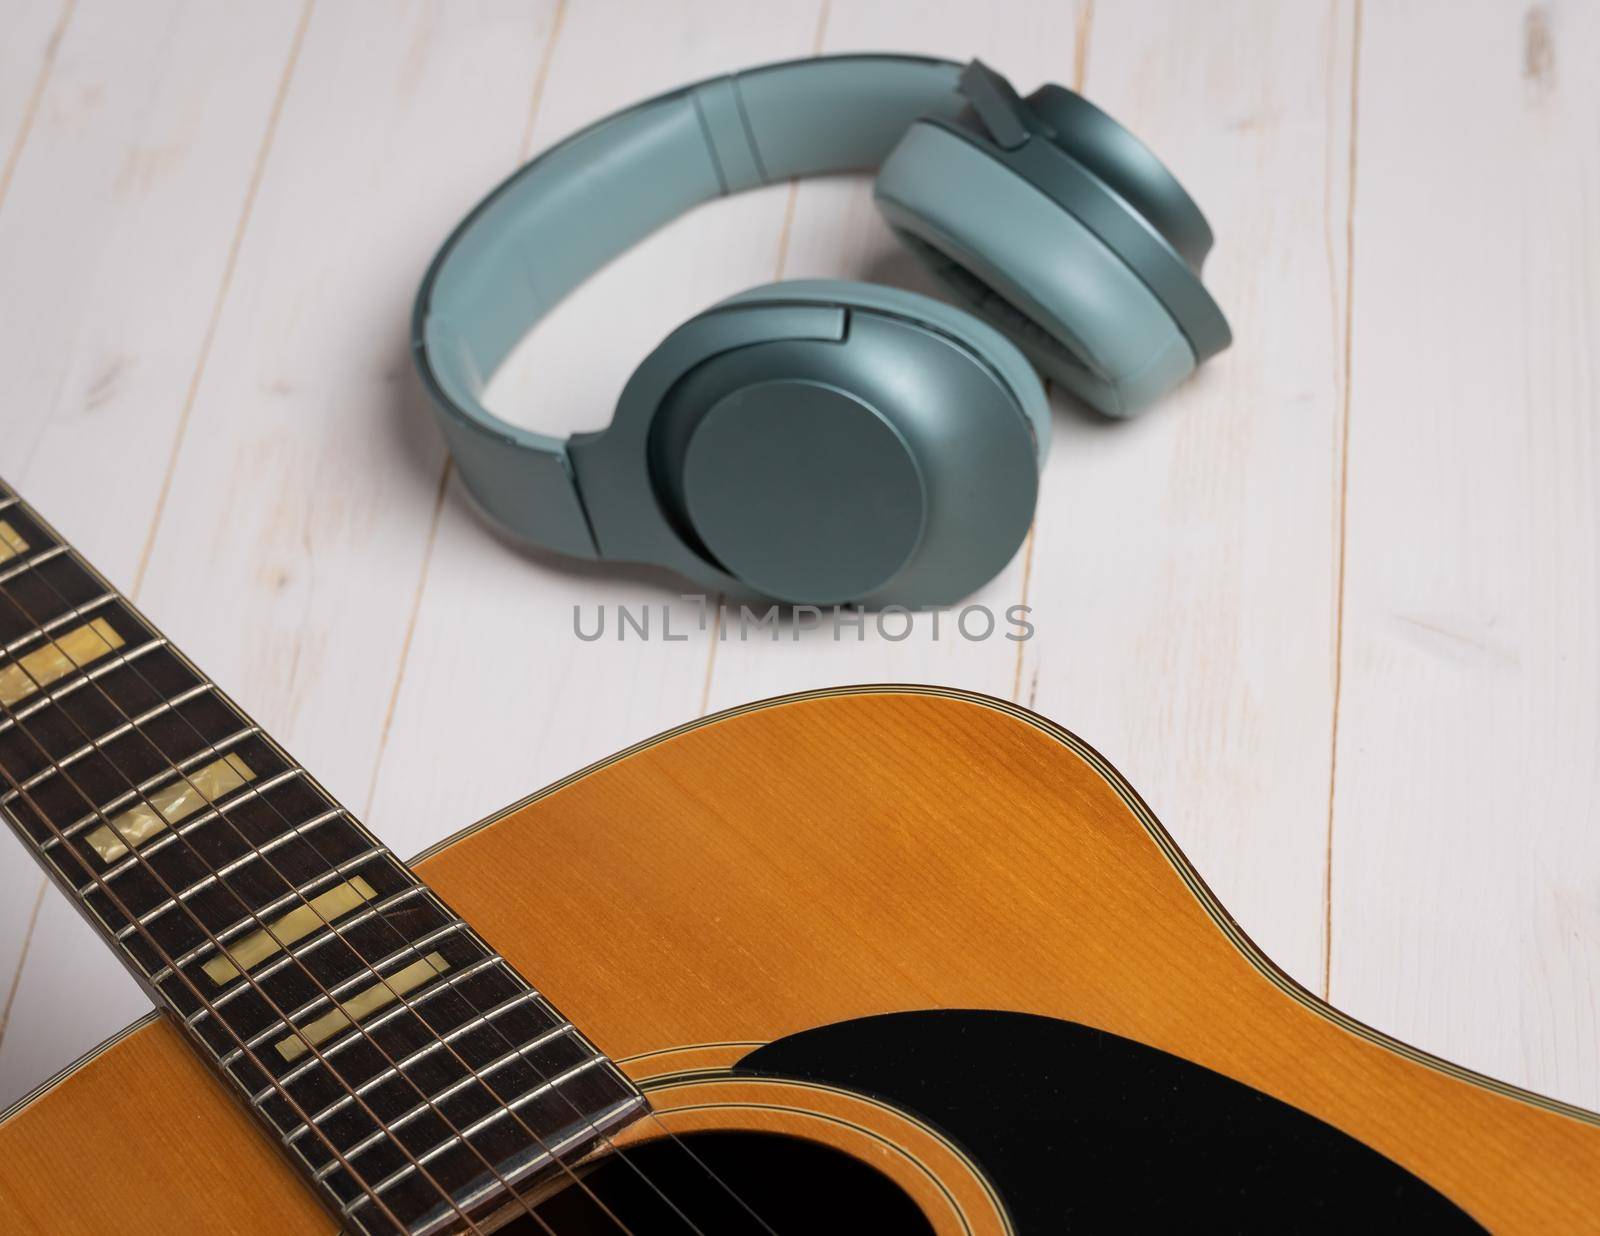 Music recording scene with guitar, empty music sheet, pencil and headphones on white wooden table by Robertobinetti70